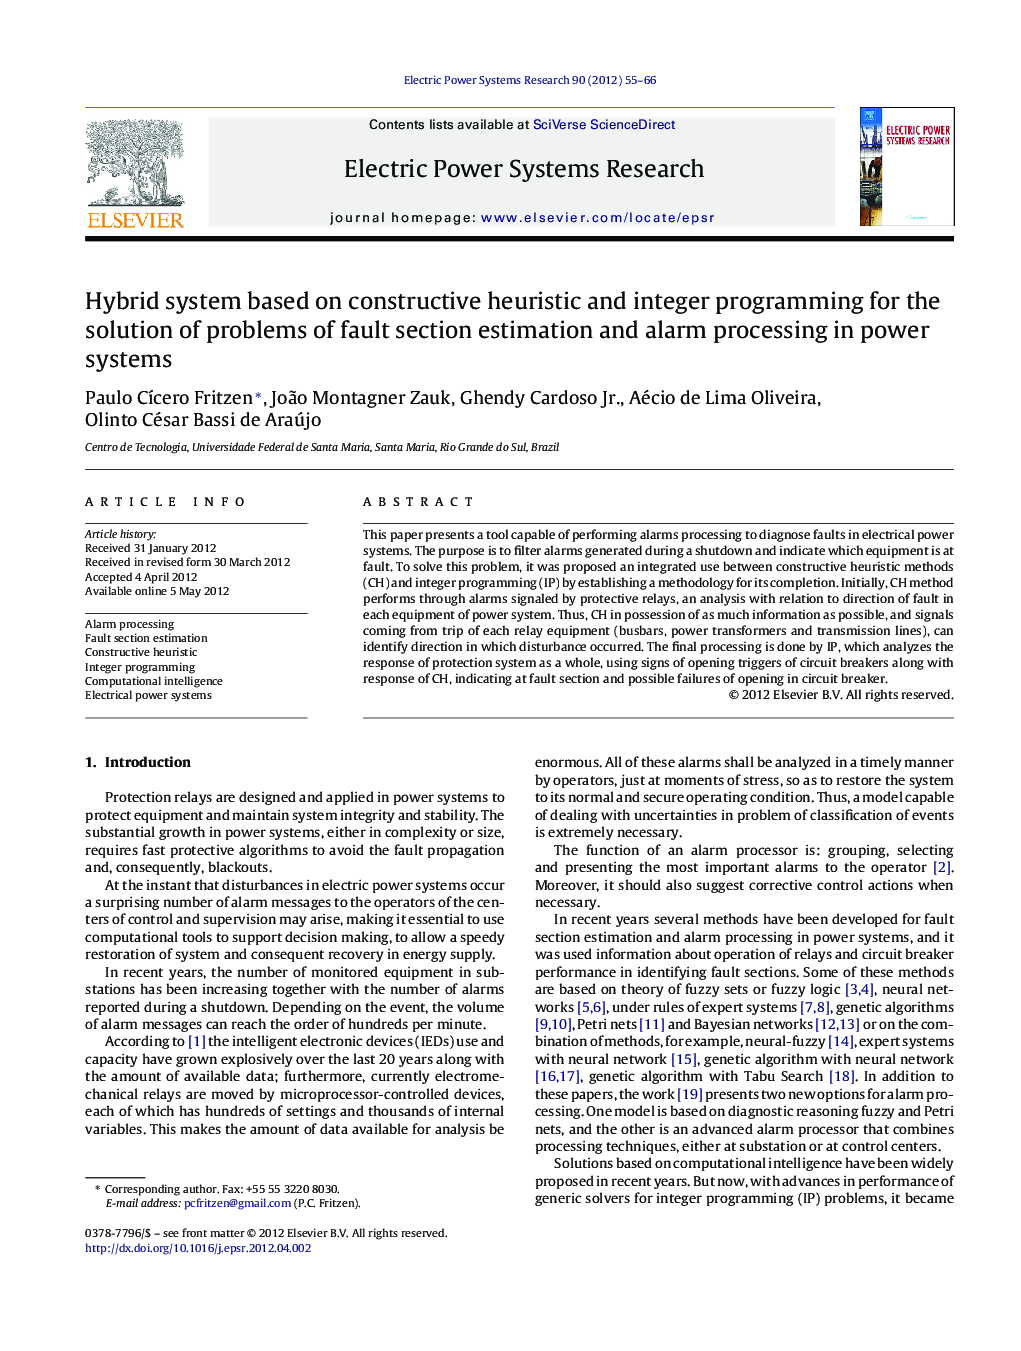 Hybrid system based on constructive heuristic and integer programming for the solution of problems of fault section estimation and alarm processing in power systems